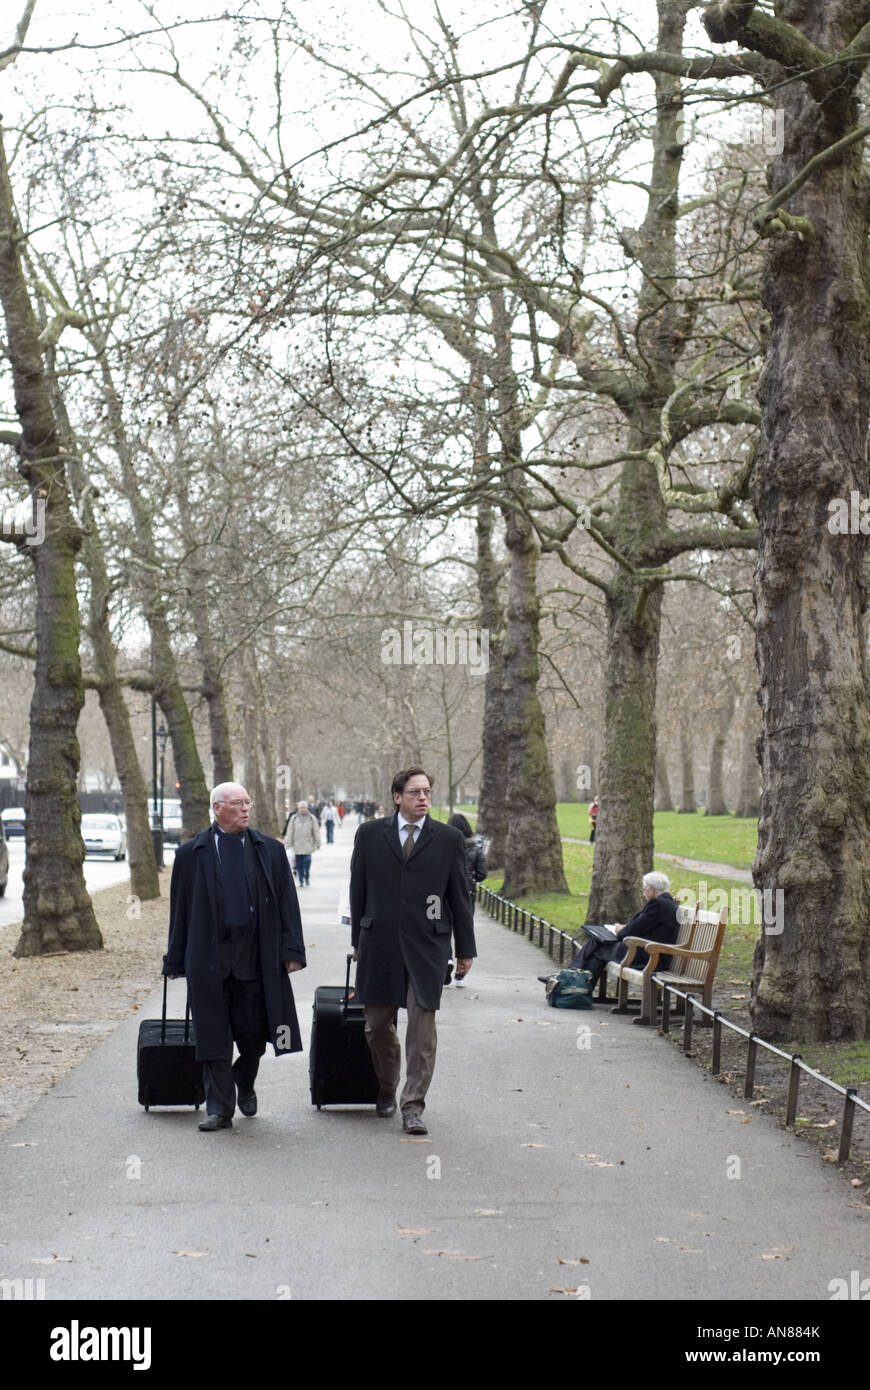 Two men pull suitcases along a footpath in St James' Park, Westminster, London, UK. Stock Photo